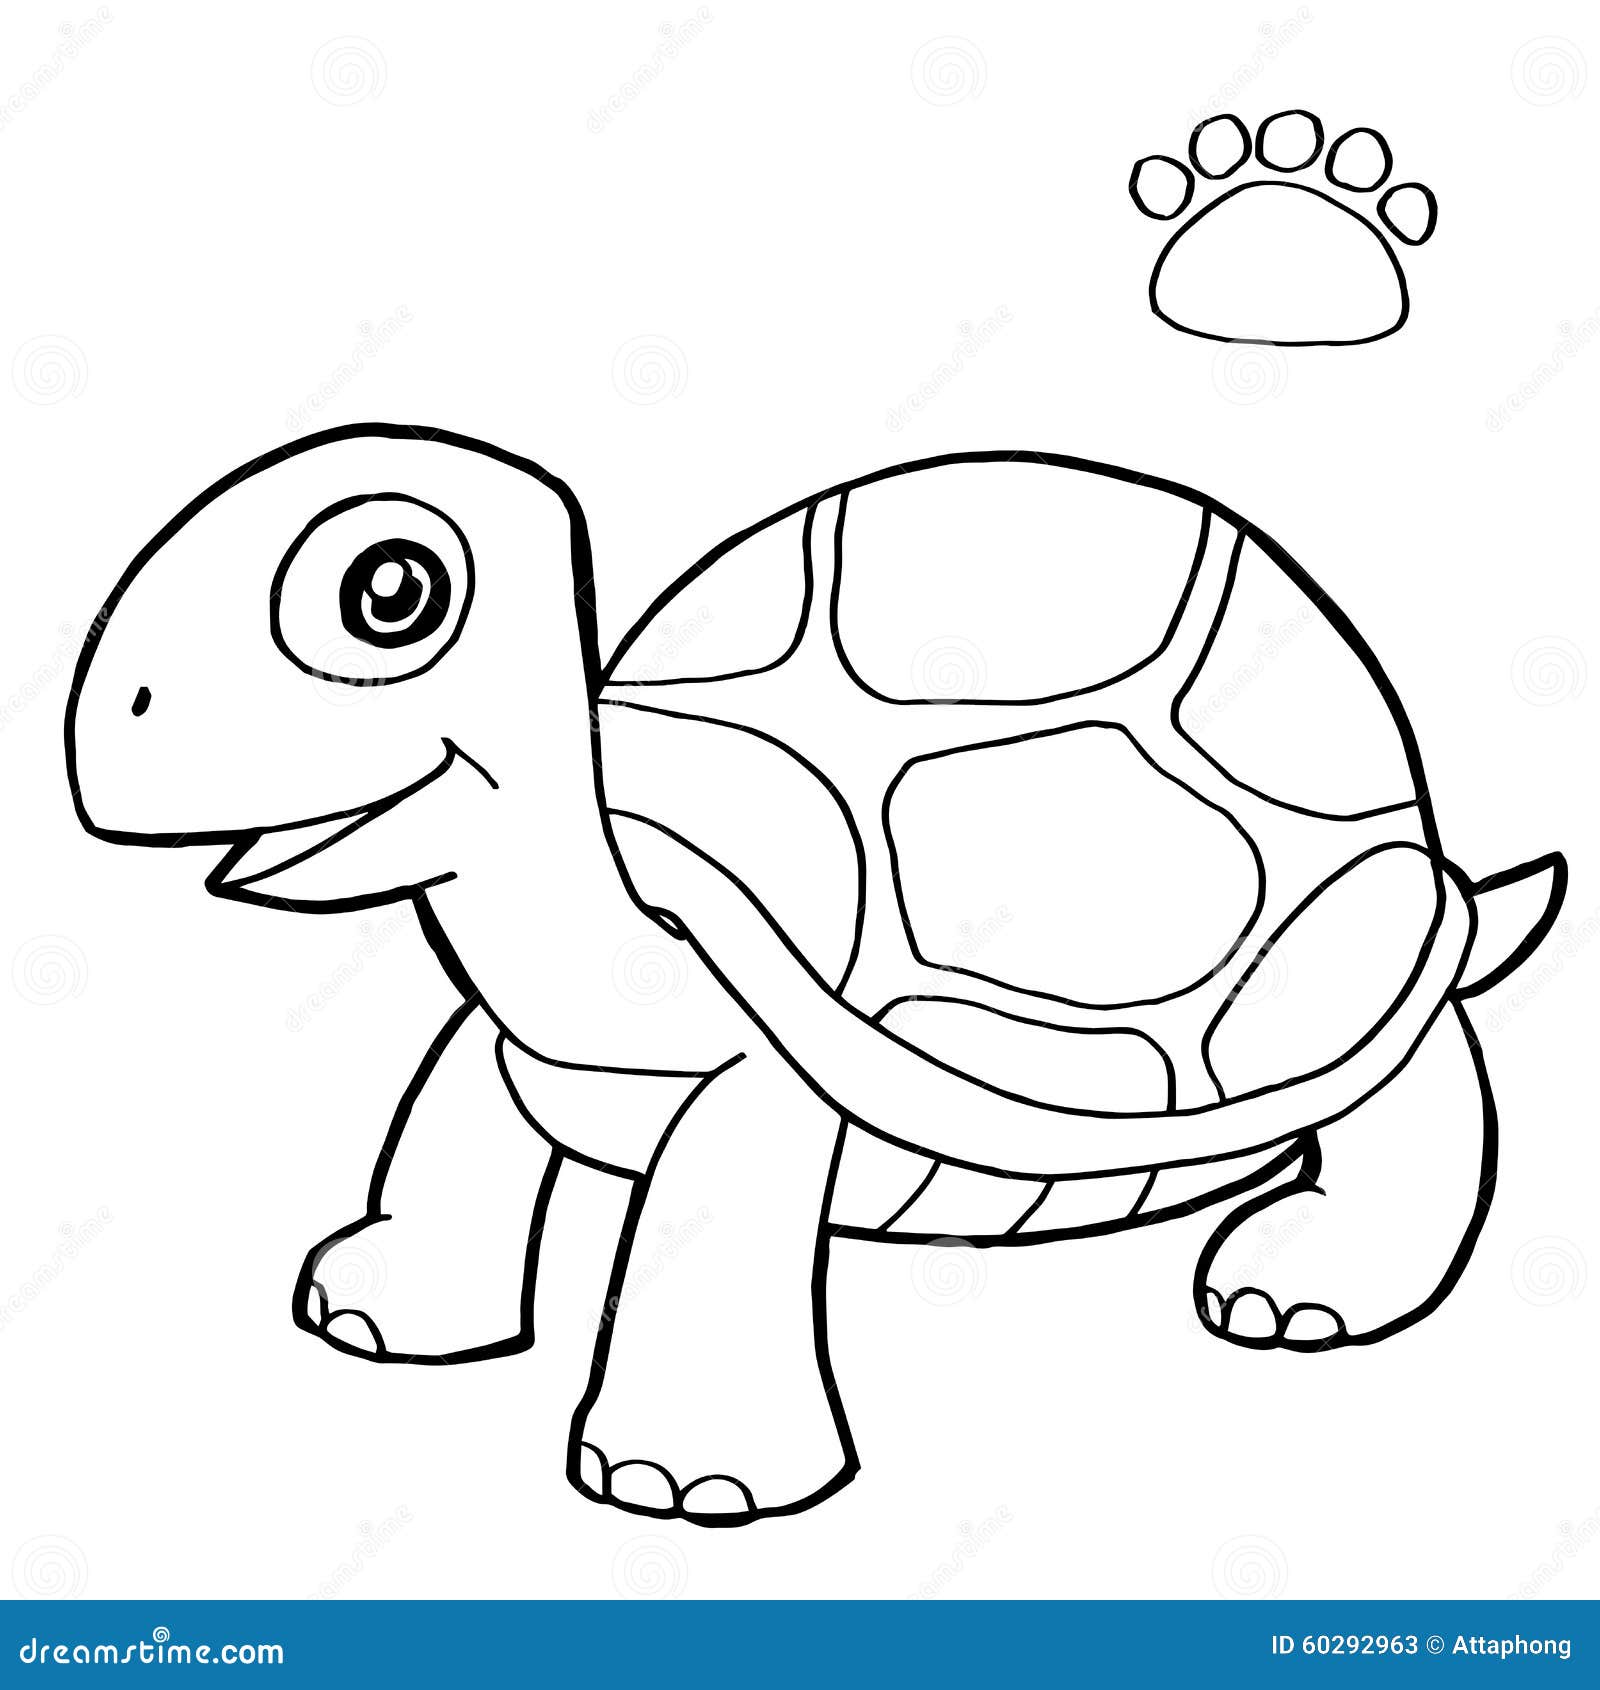 paw print turtle coloring pages vector image 60292963